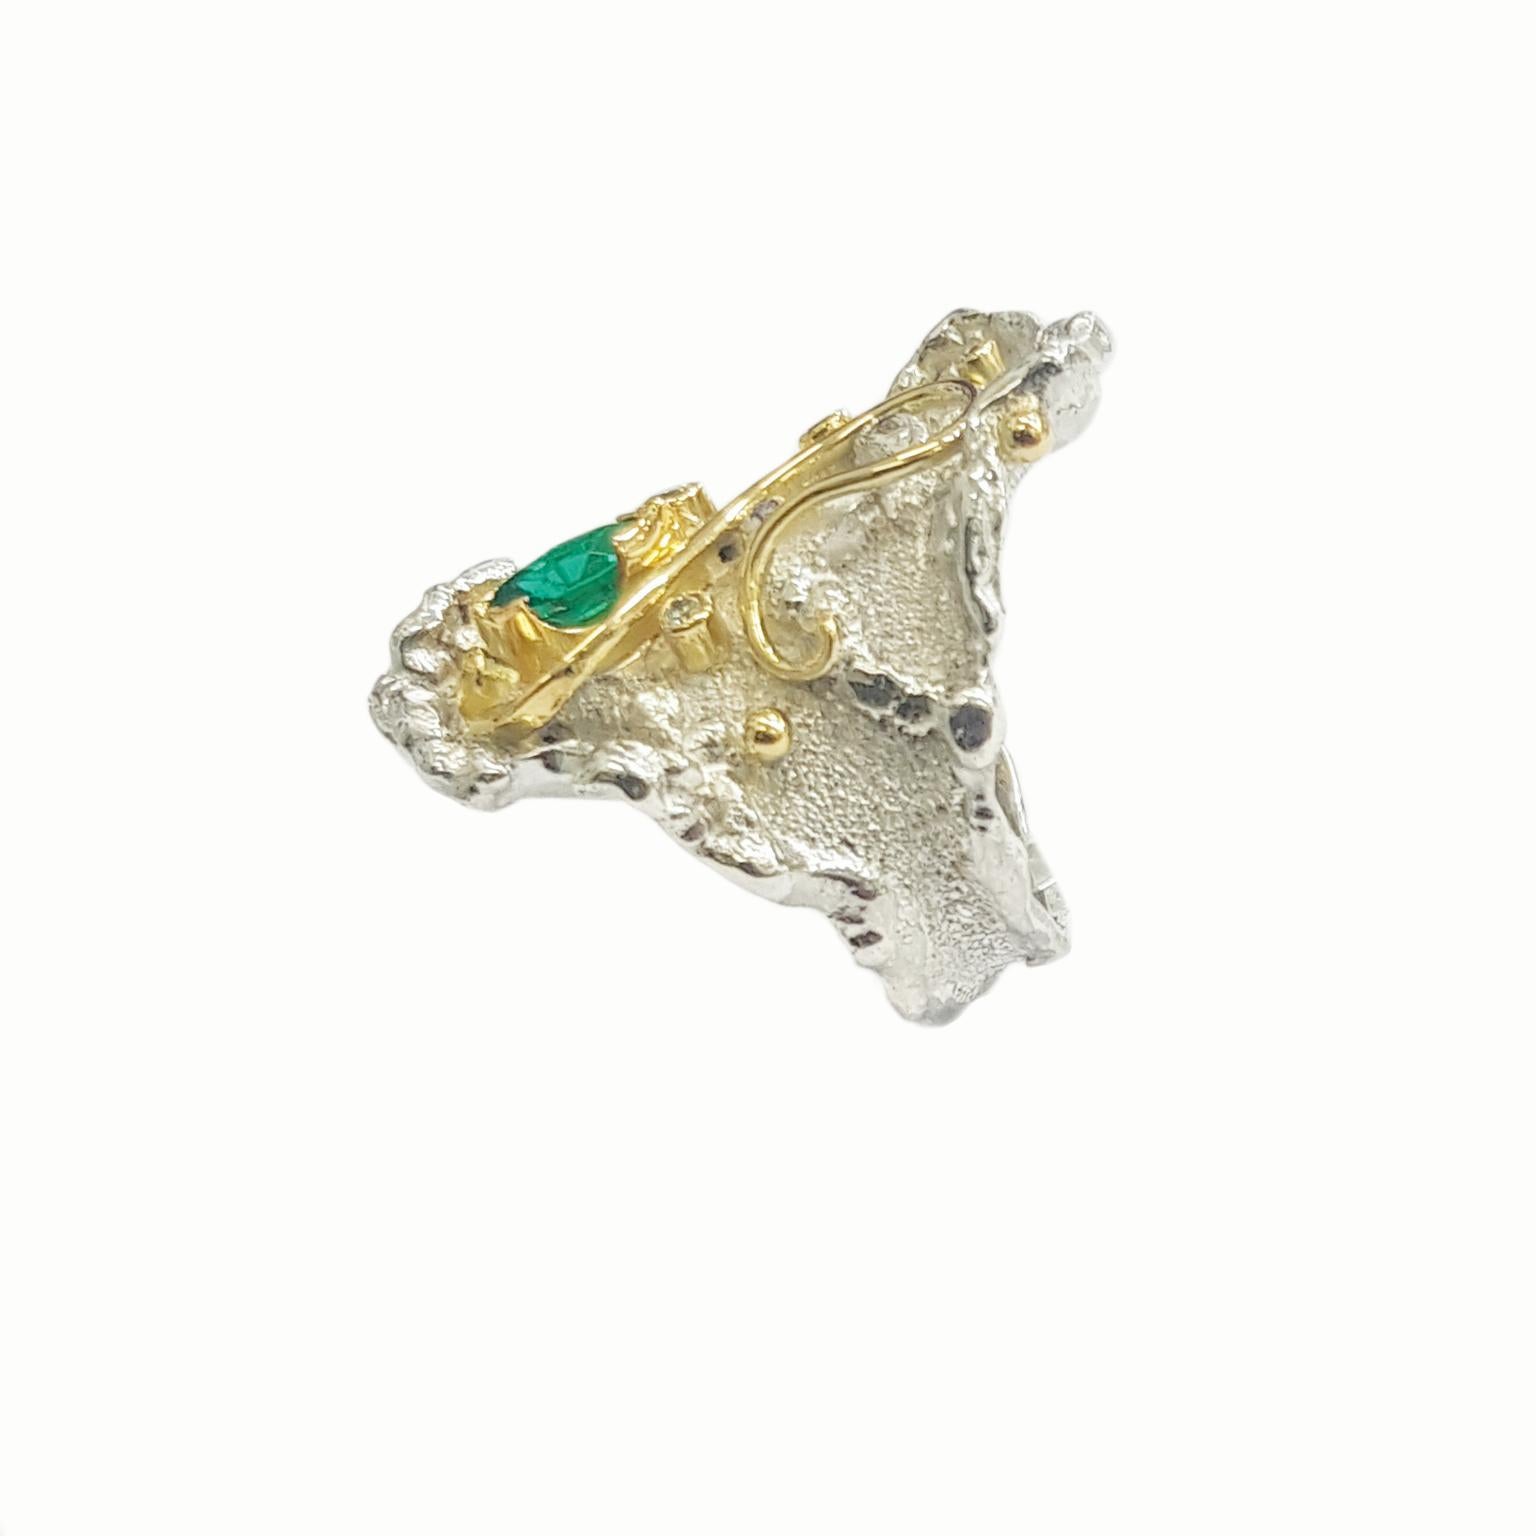 Unveiling the epitome of elegance – the Sterling Silver and 18ct Yellow Gold Molten Edge adorned with diamonds and emeralds, a true masterpiece by Paul Amey! 

Embrace the luxurious allure of this unique creation, featuring a large cigar band style